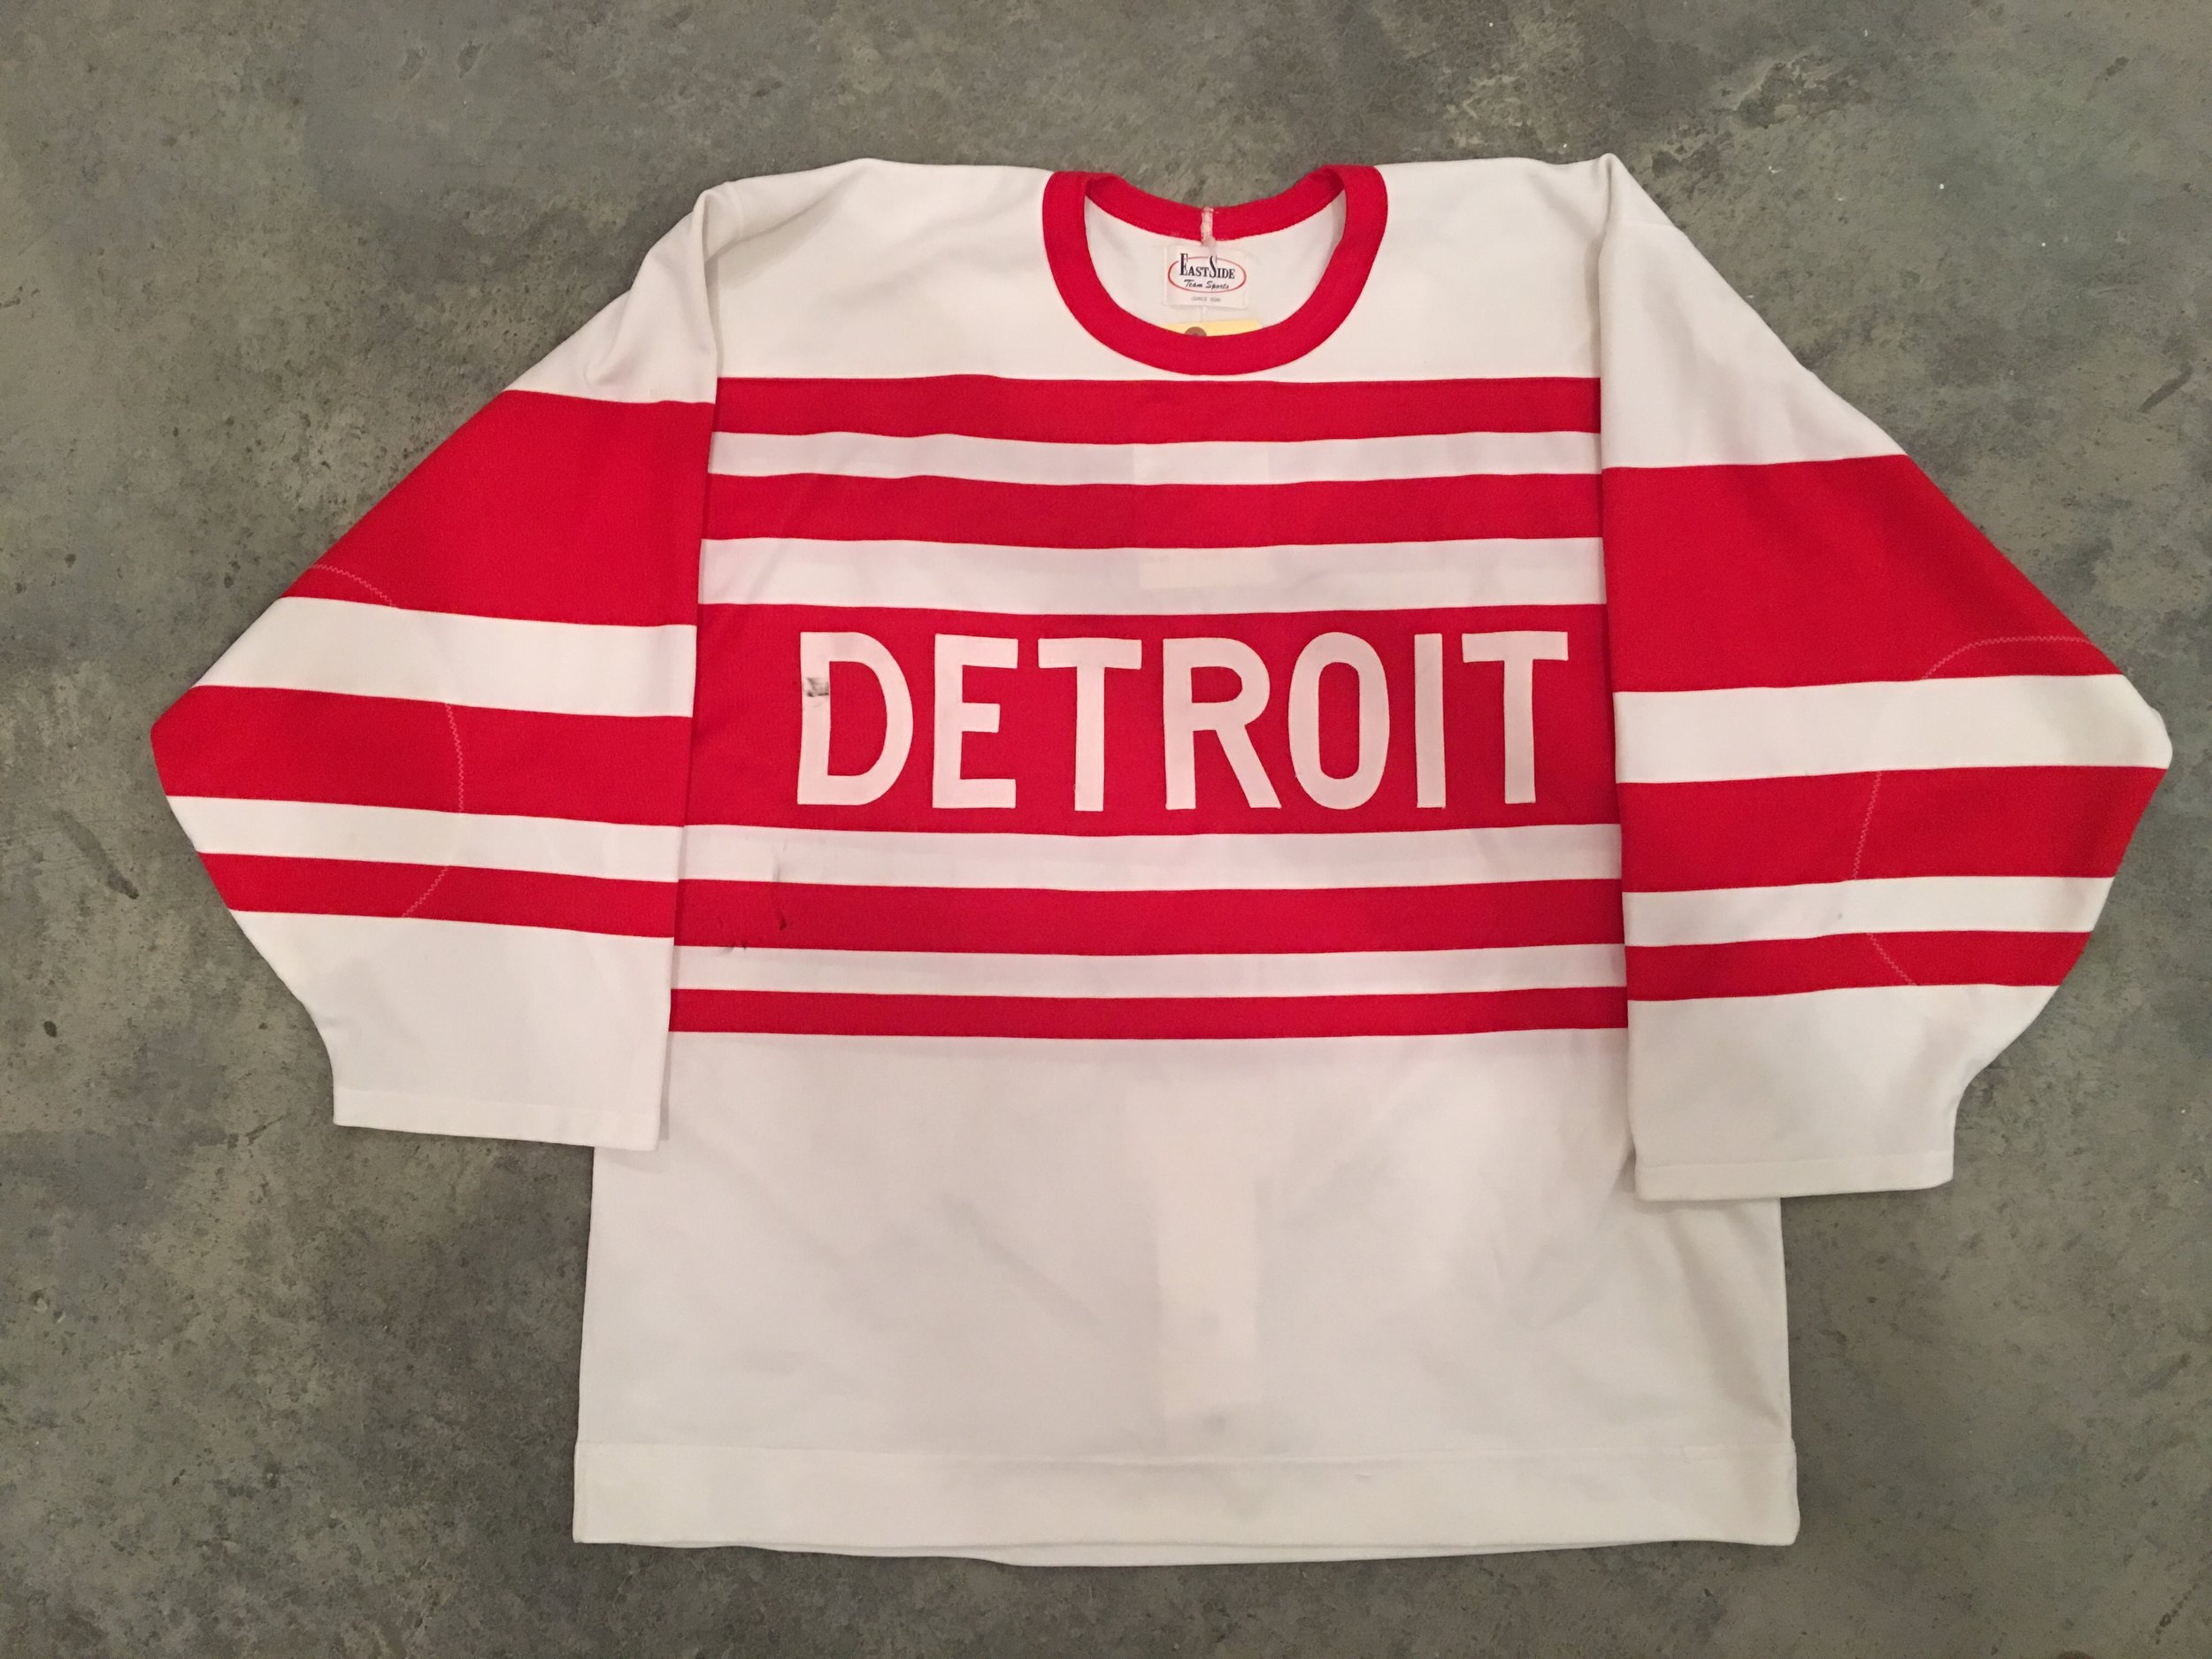 Don Beaupre Heritage Leafs — Game Worn Goalie Jerseys